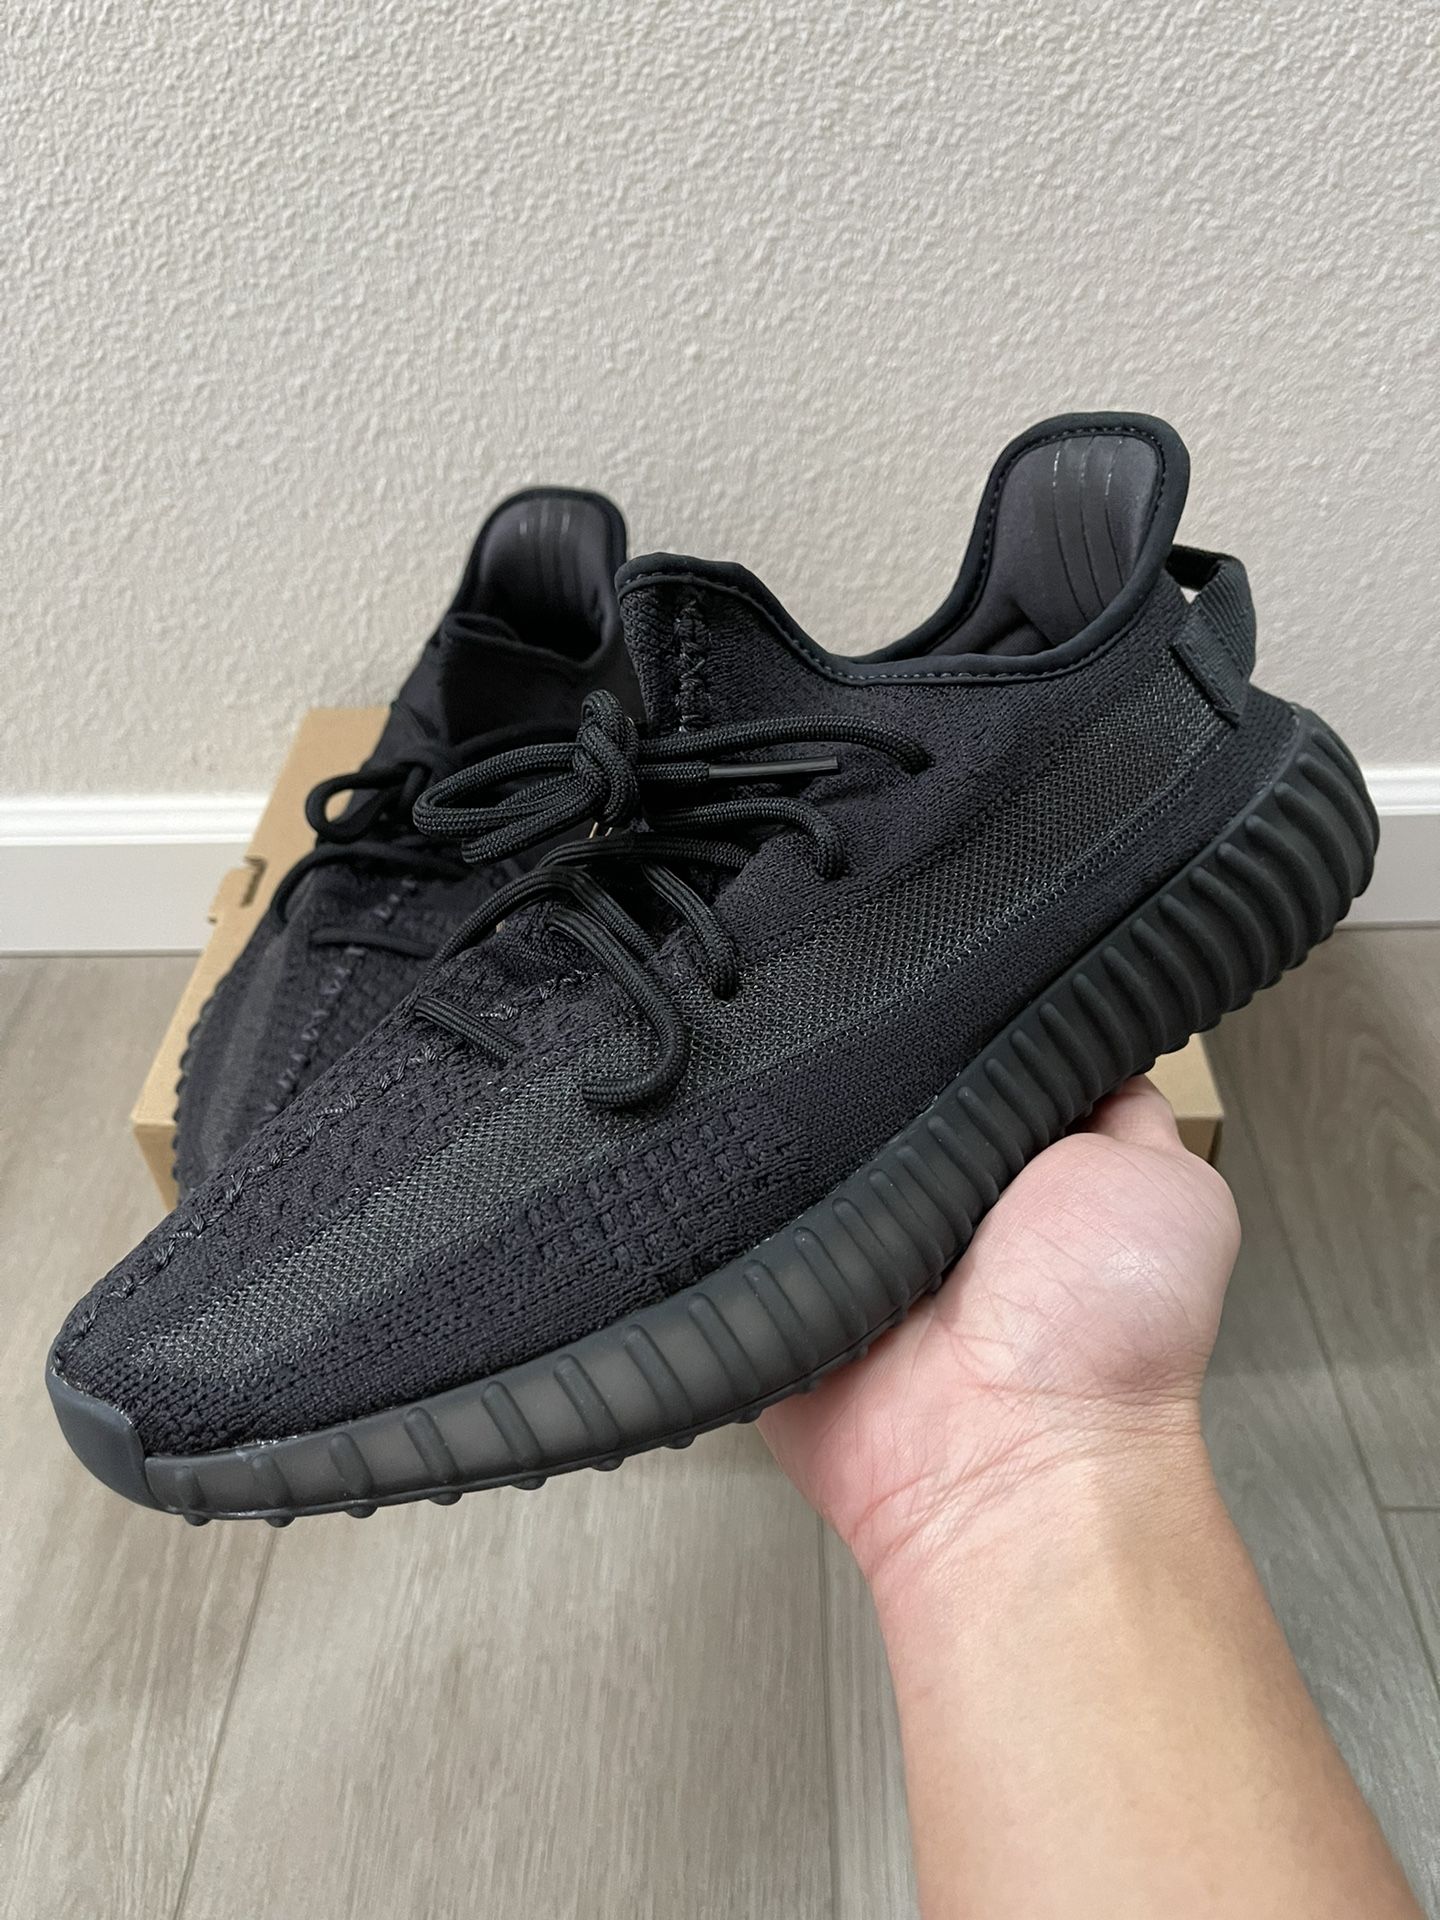 Adidas Yeezy Boost 350 V2 Onyx Men’s Size 10.5 NEW/DS HQ4540